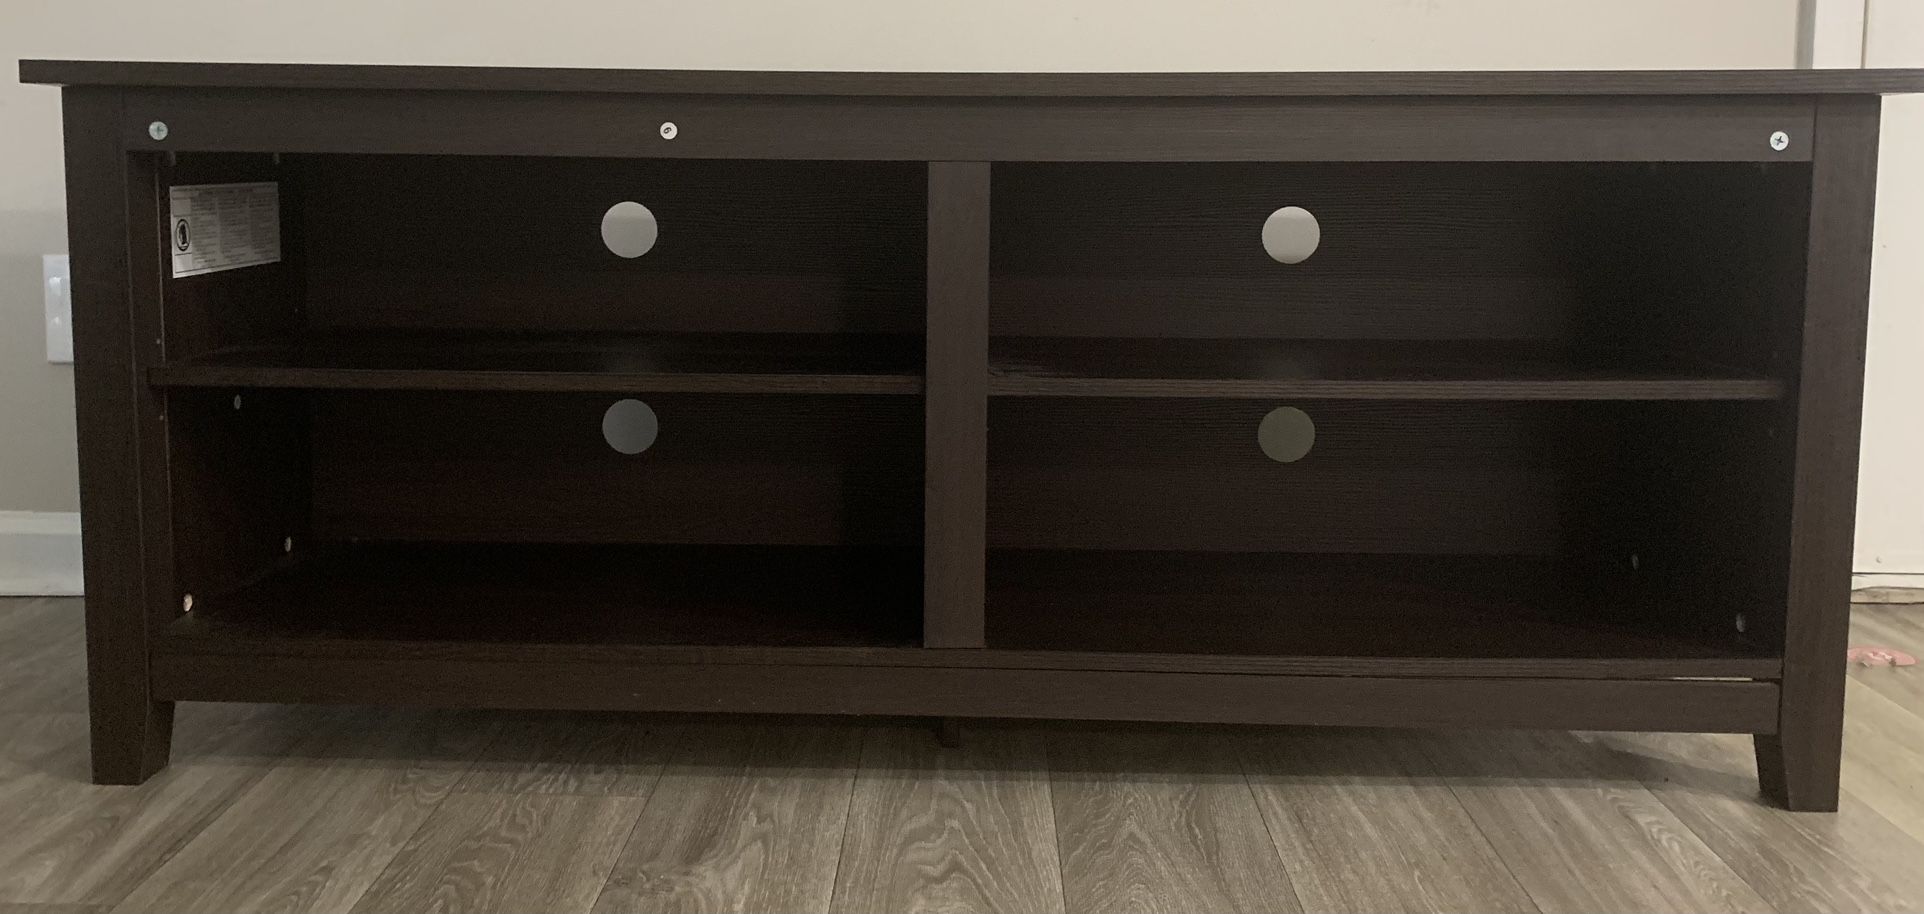 TV stand with shelves